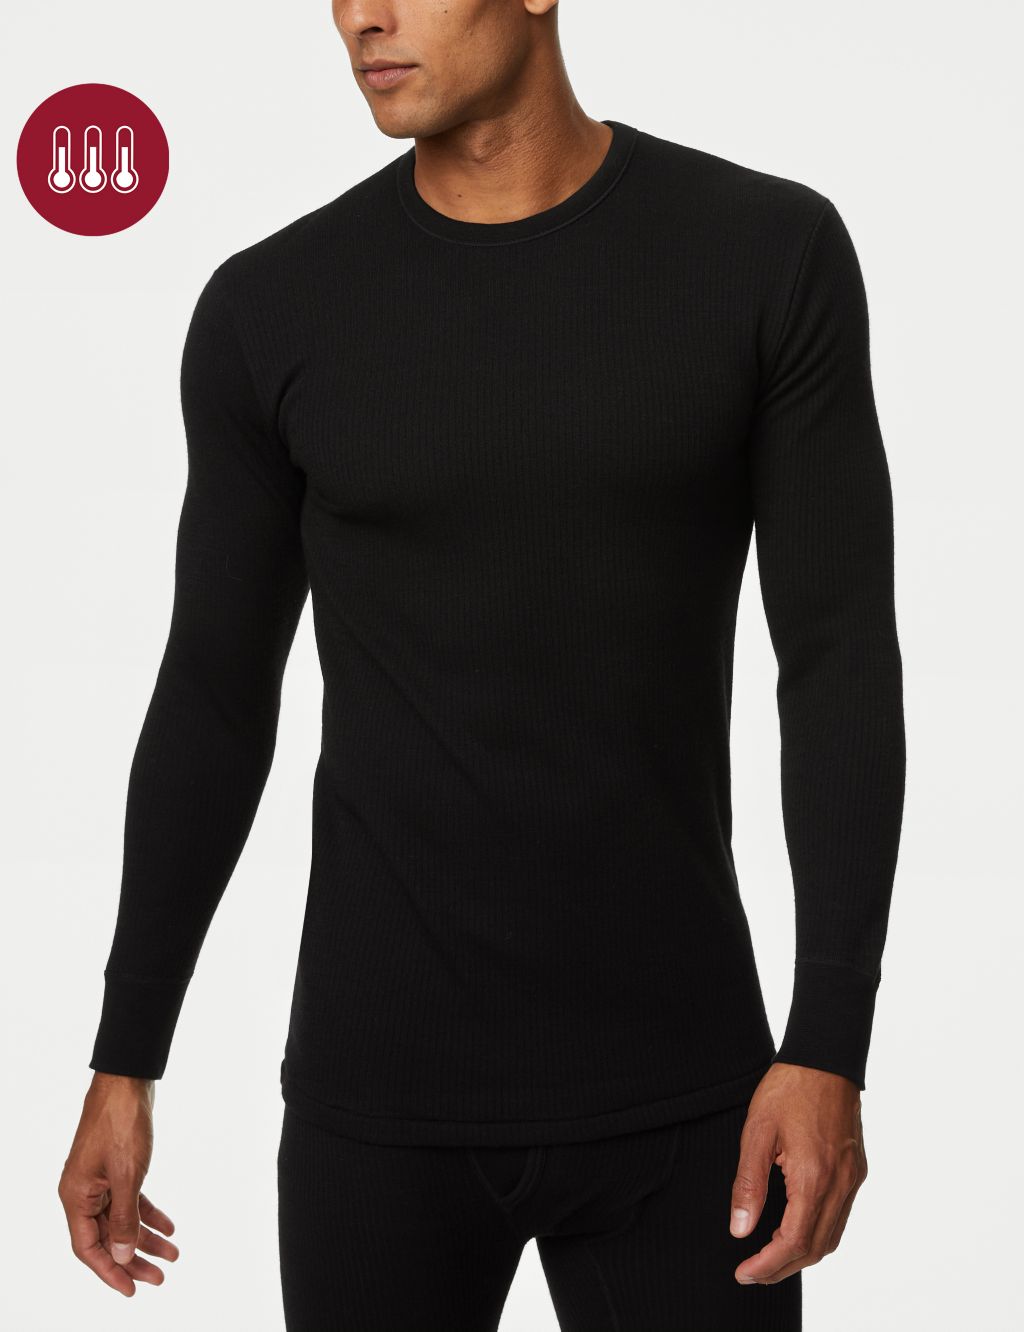 The 18 Best Pairs of Thermal Underwear Keep You Extra Toasty